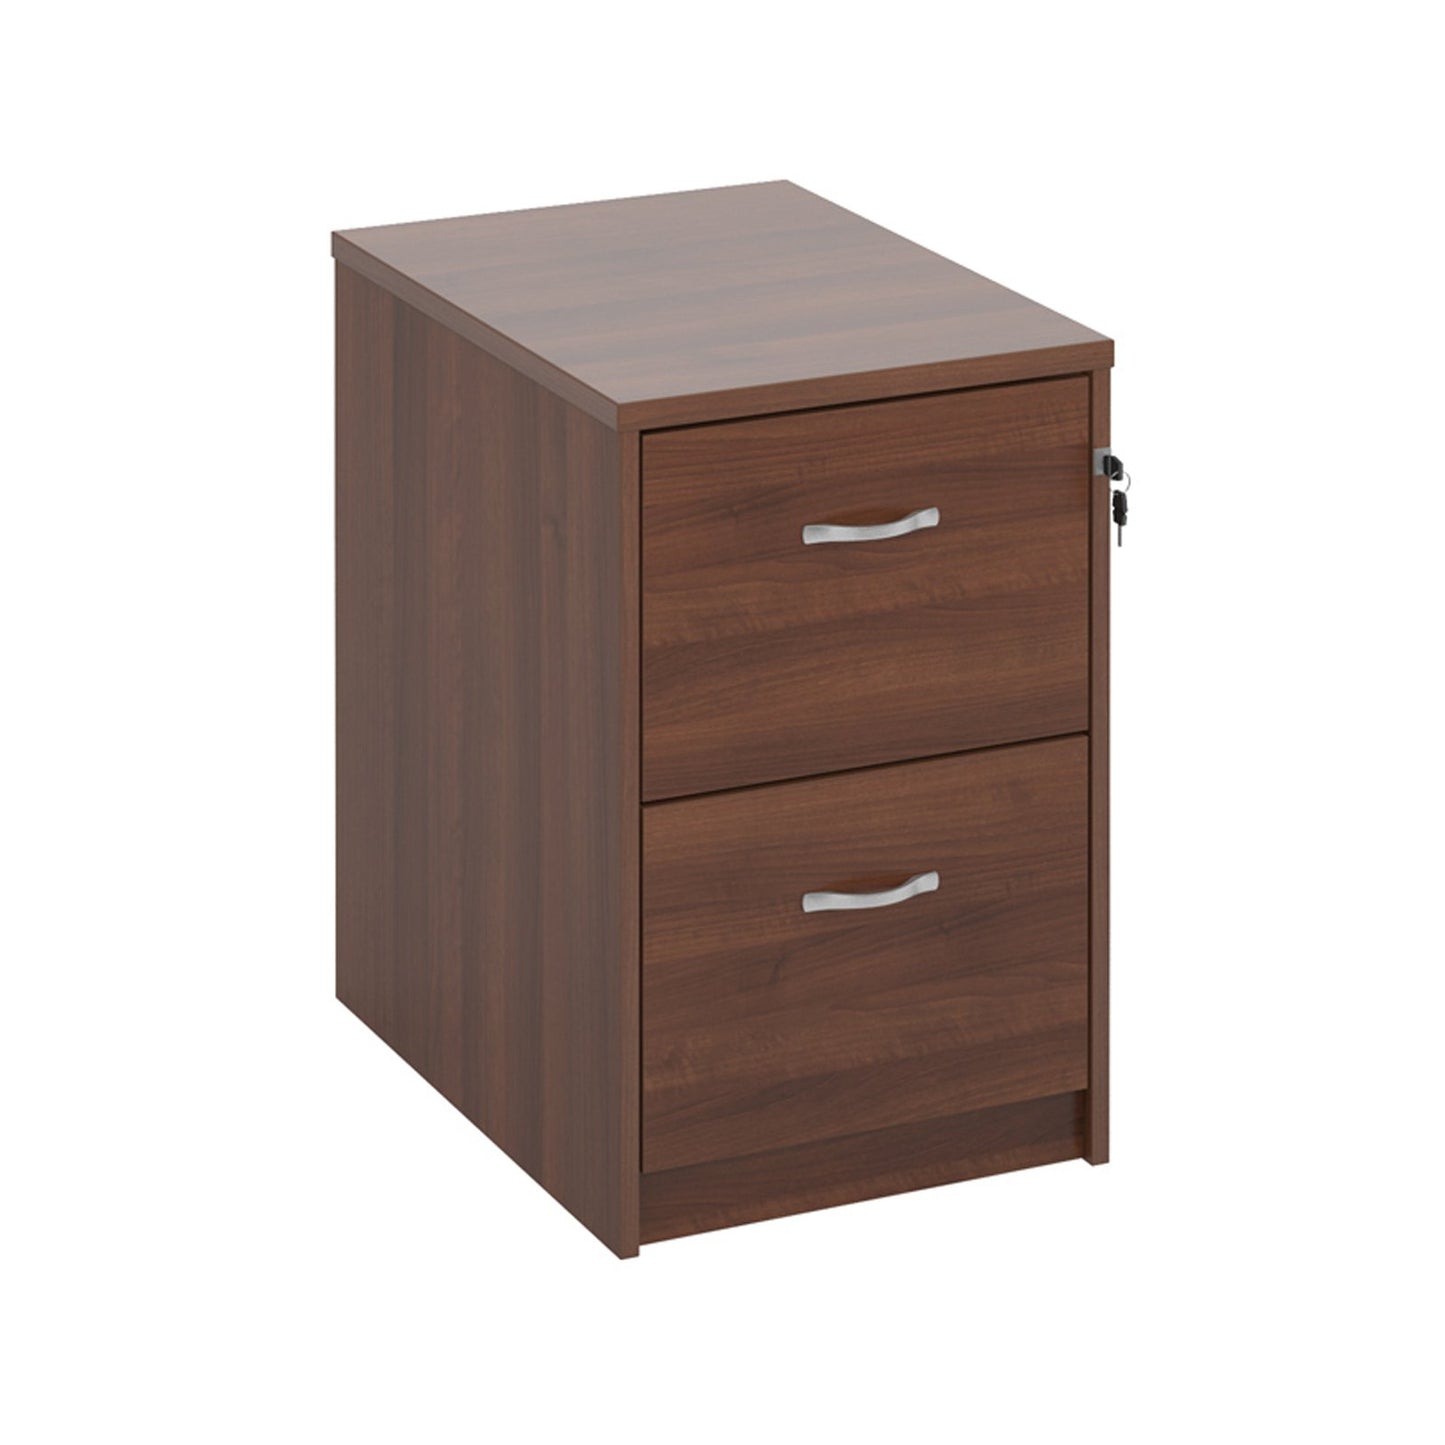 Wooden Filing Cabinet With Silver Handles - 3 Drawer - Oak